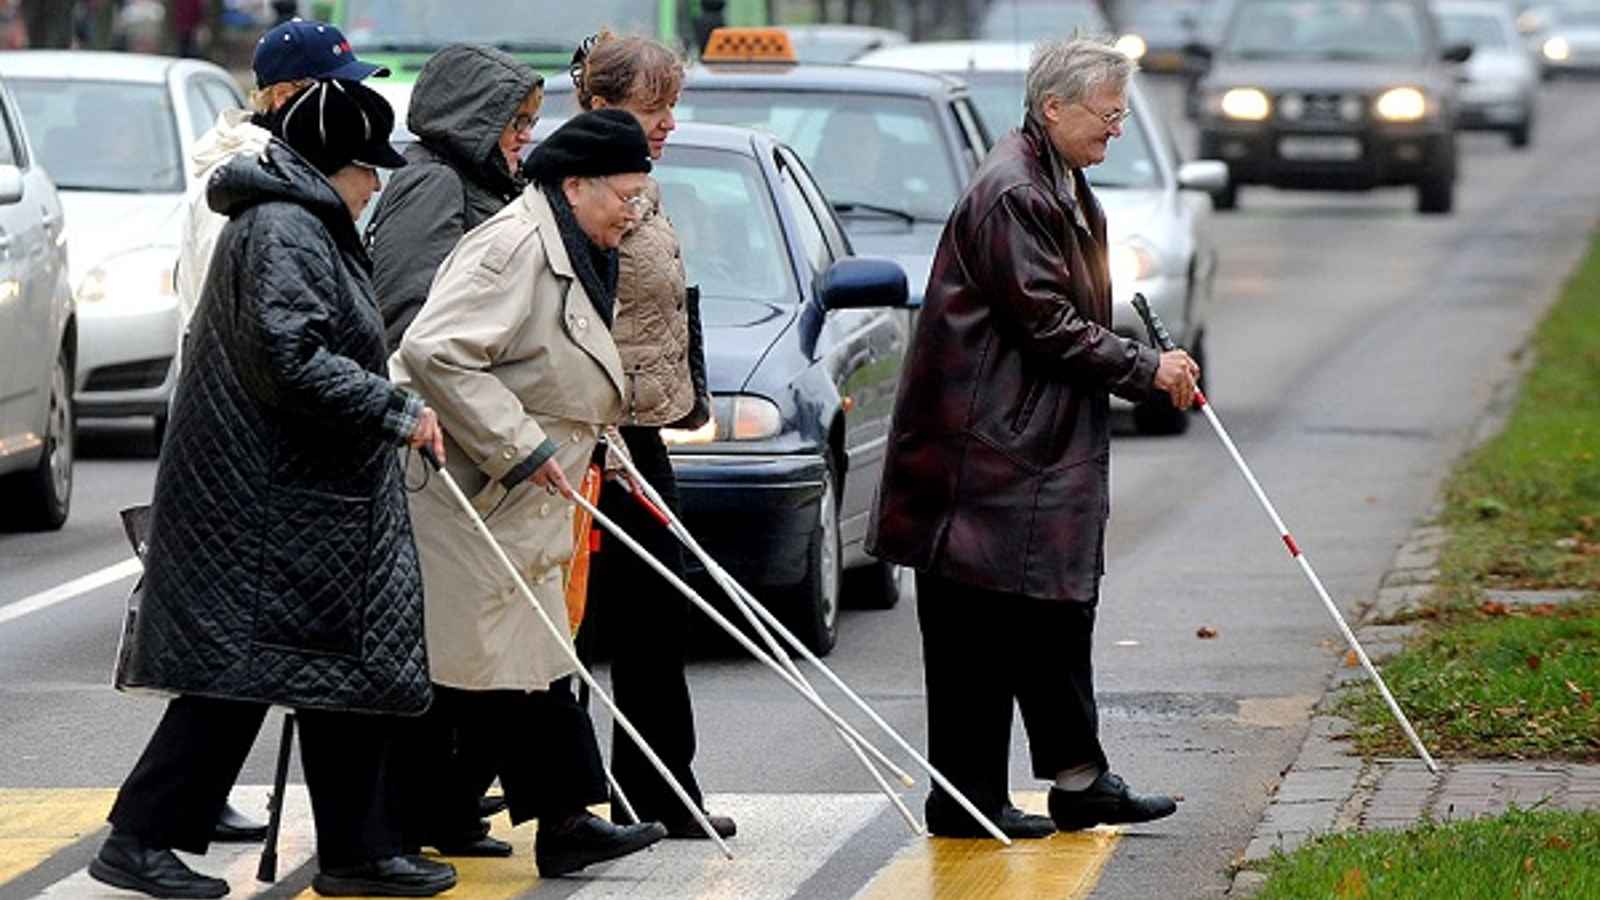 White Cane Safety Day 2023: Date, History, Facts about white cane laws